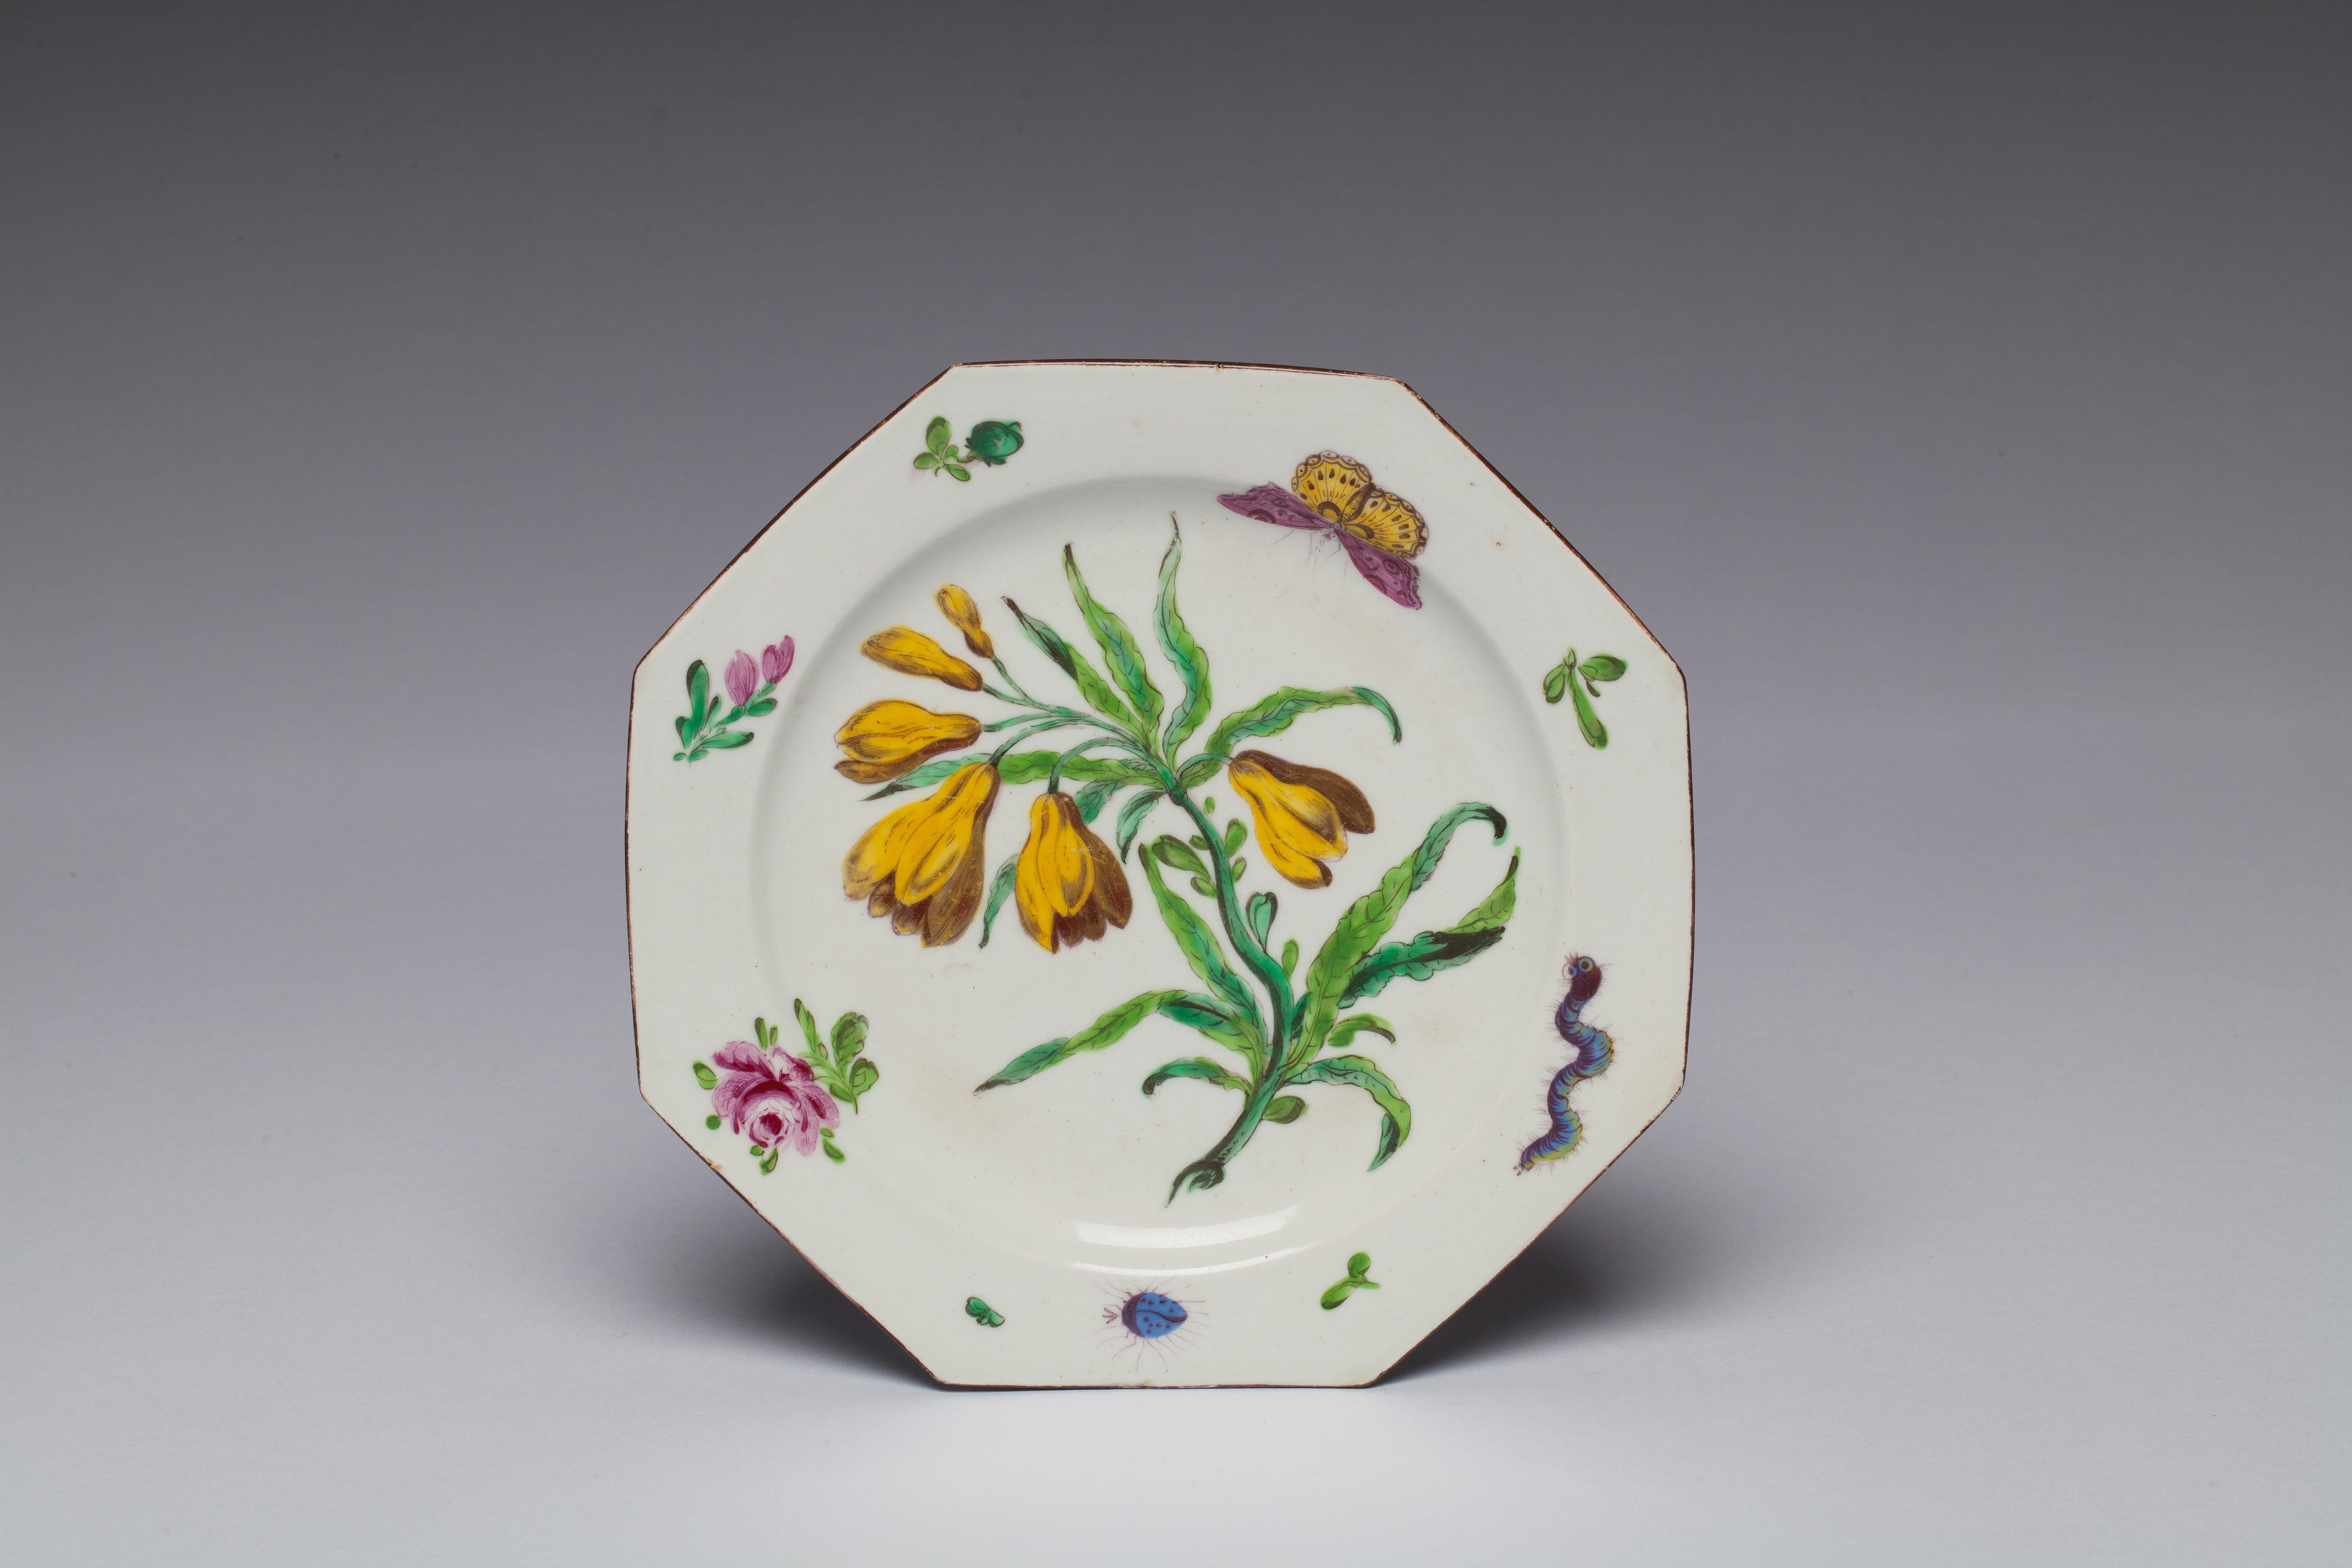 A fine octagonal plate painted in the botanical style; possibly the yellow gloriosa climbing lily.

Provenance: Taylor Collection; Robyn Robb 2003.
Filled edge chips.
 